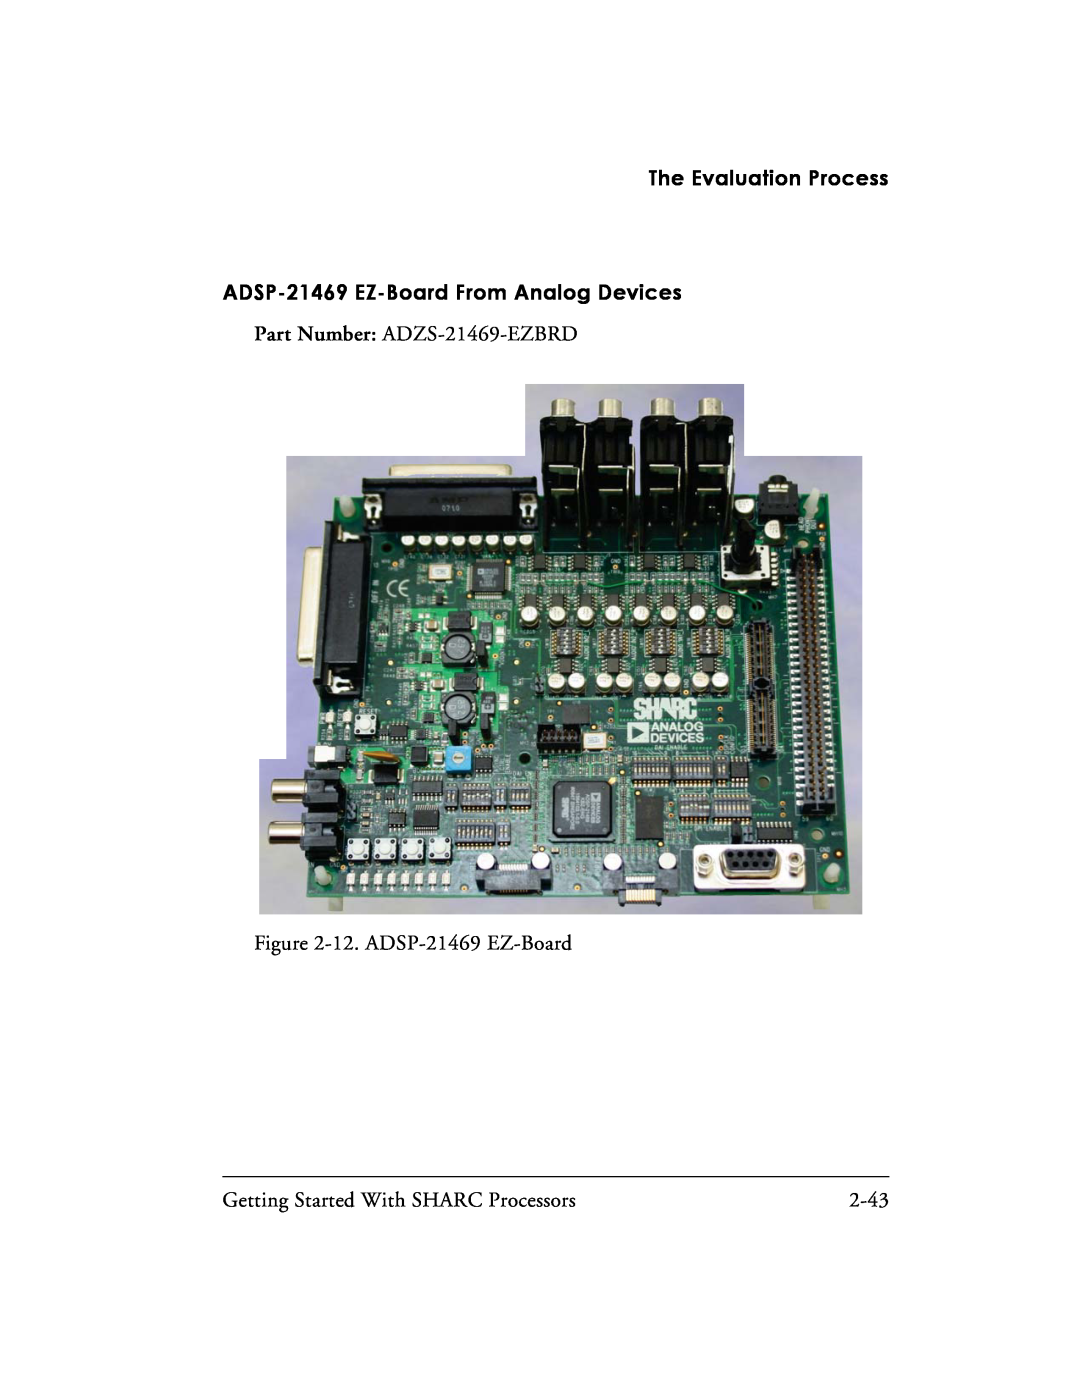 Analog Devices 82-003536-01 ADSP-21469 EZ-BoardFrom Analog Devices, The Evaluation Process, Part Number ADZS-21469-EZBRD 